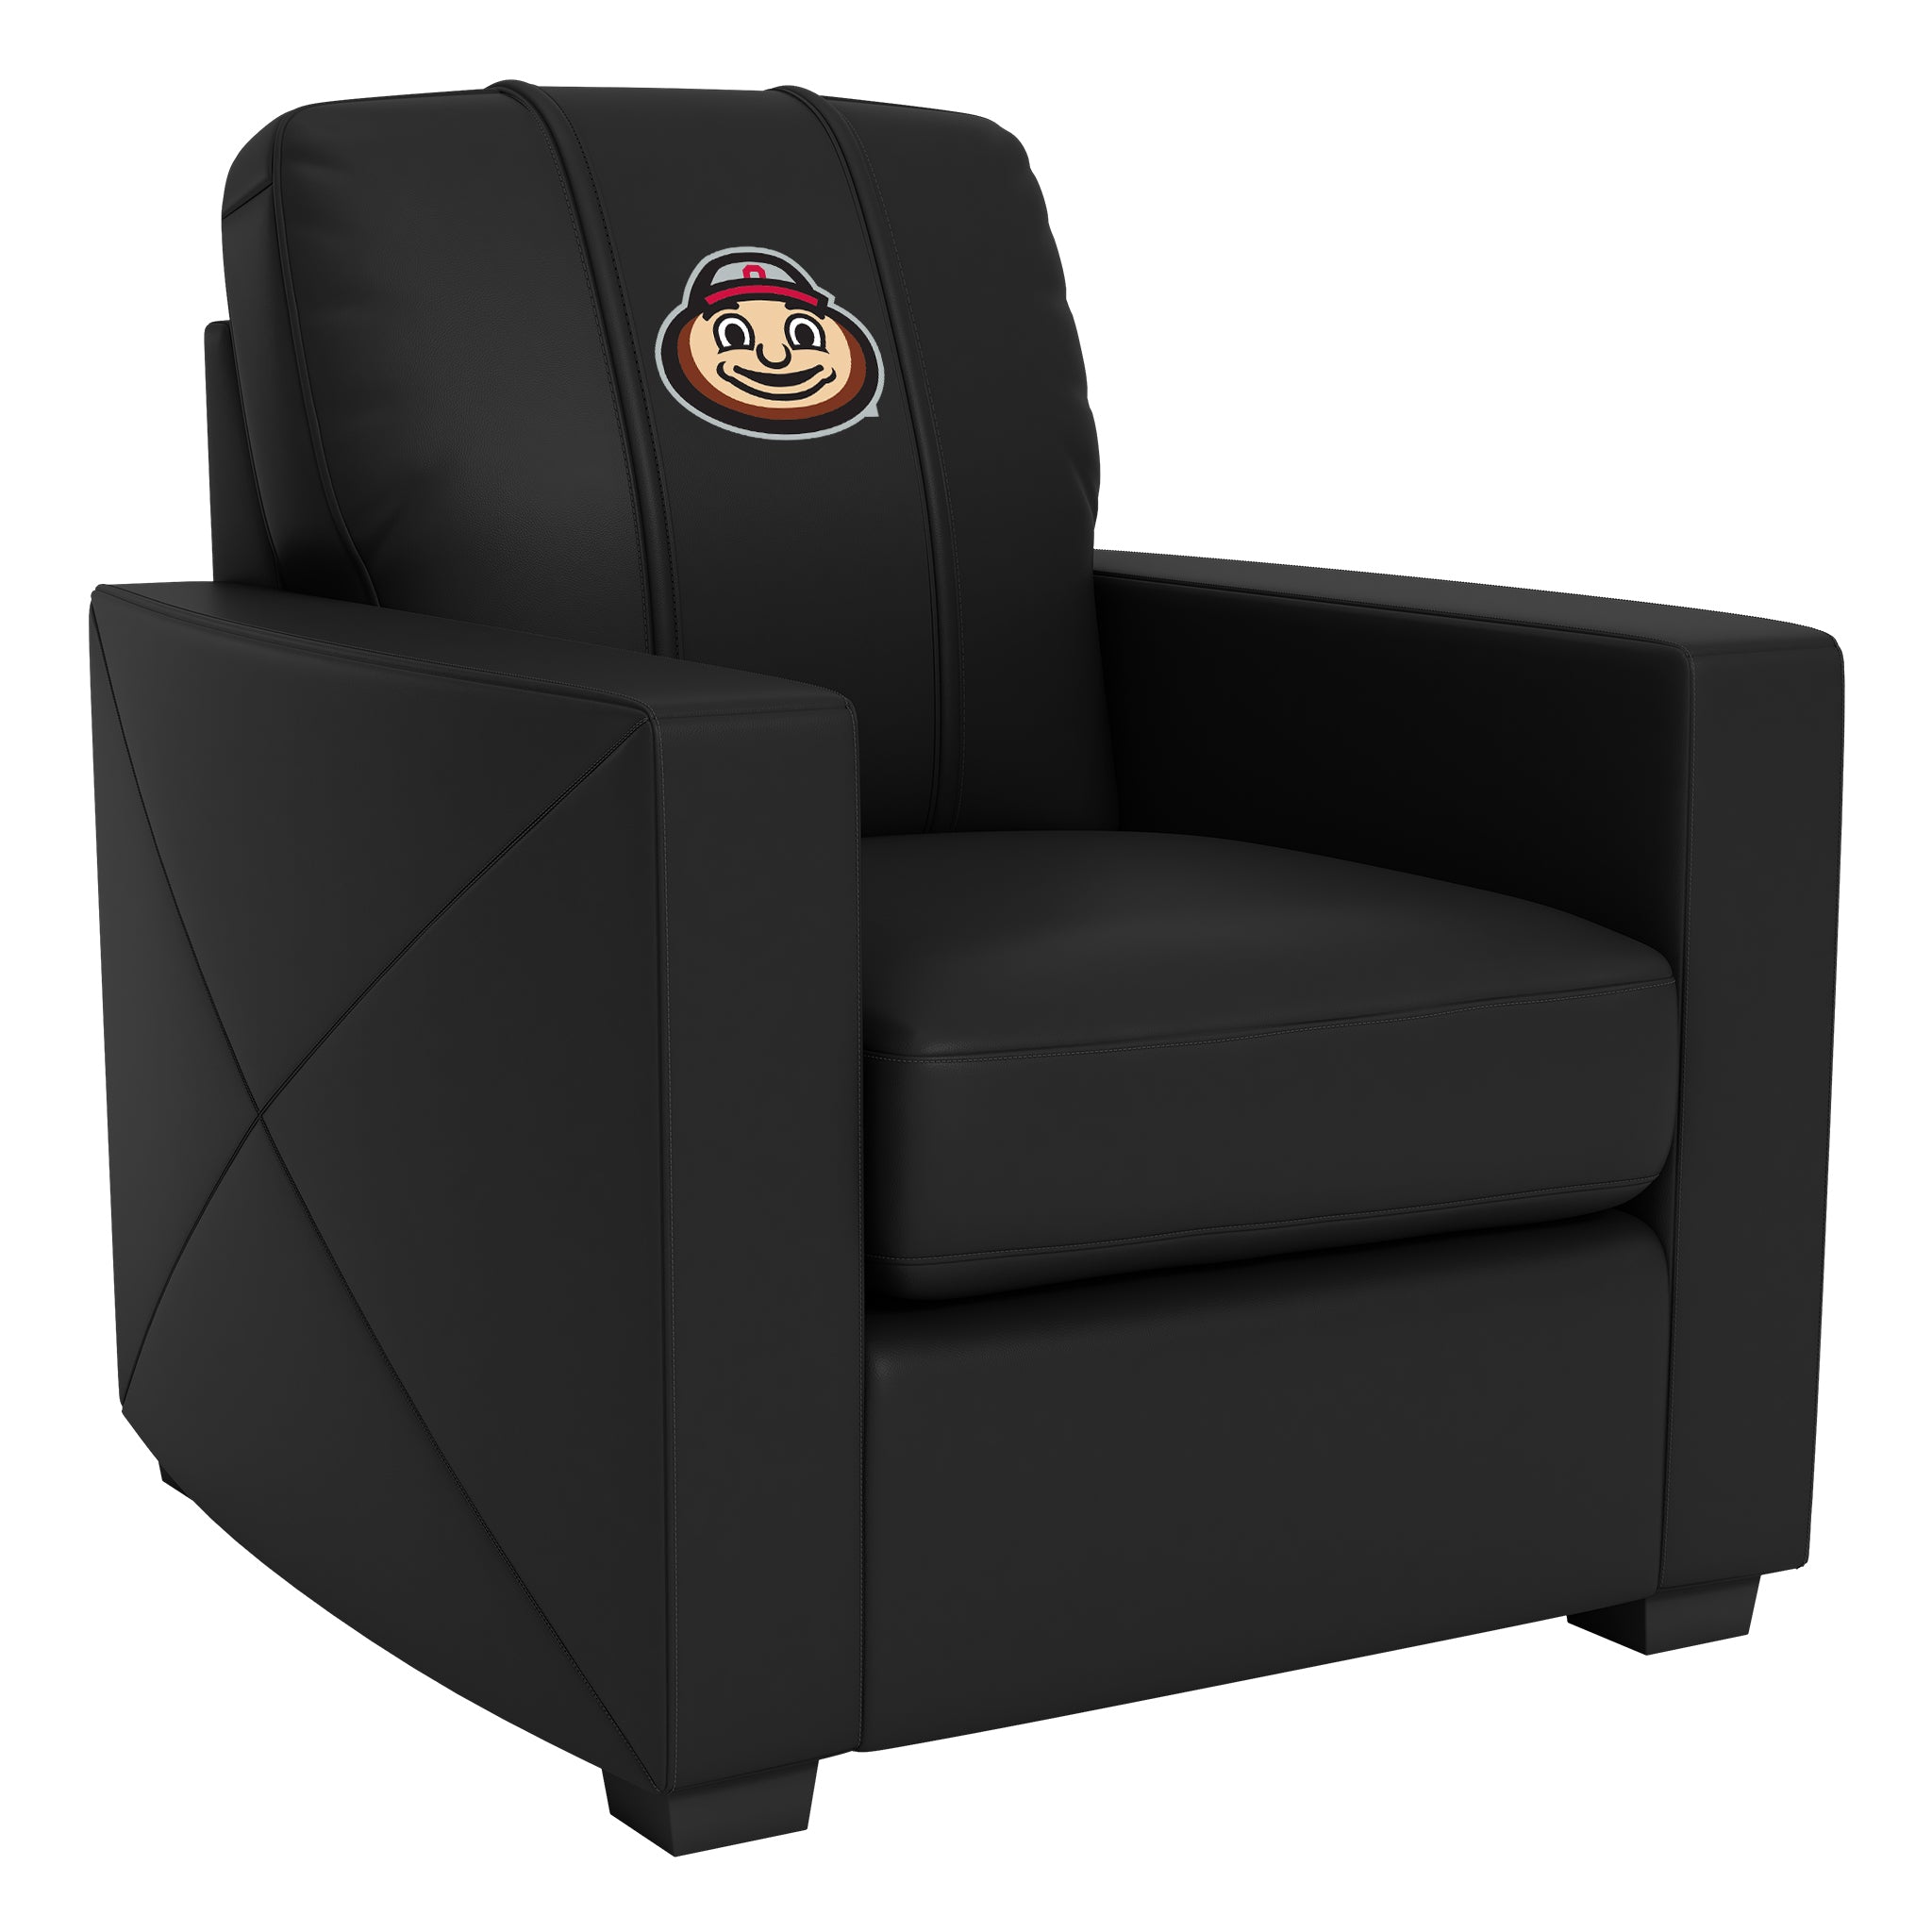 Ohio State Silver Club Chair with Ohio State Buckeyes Brutus Head Logo